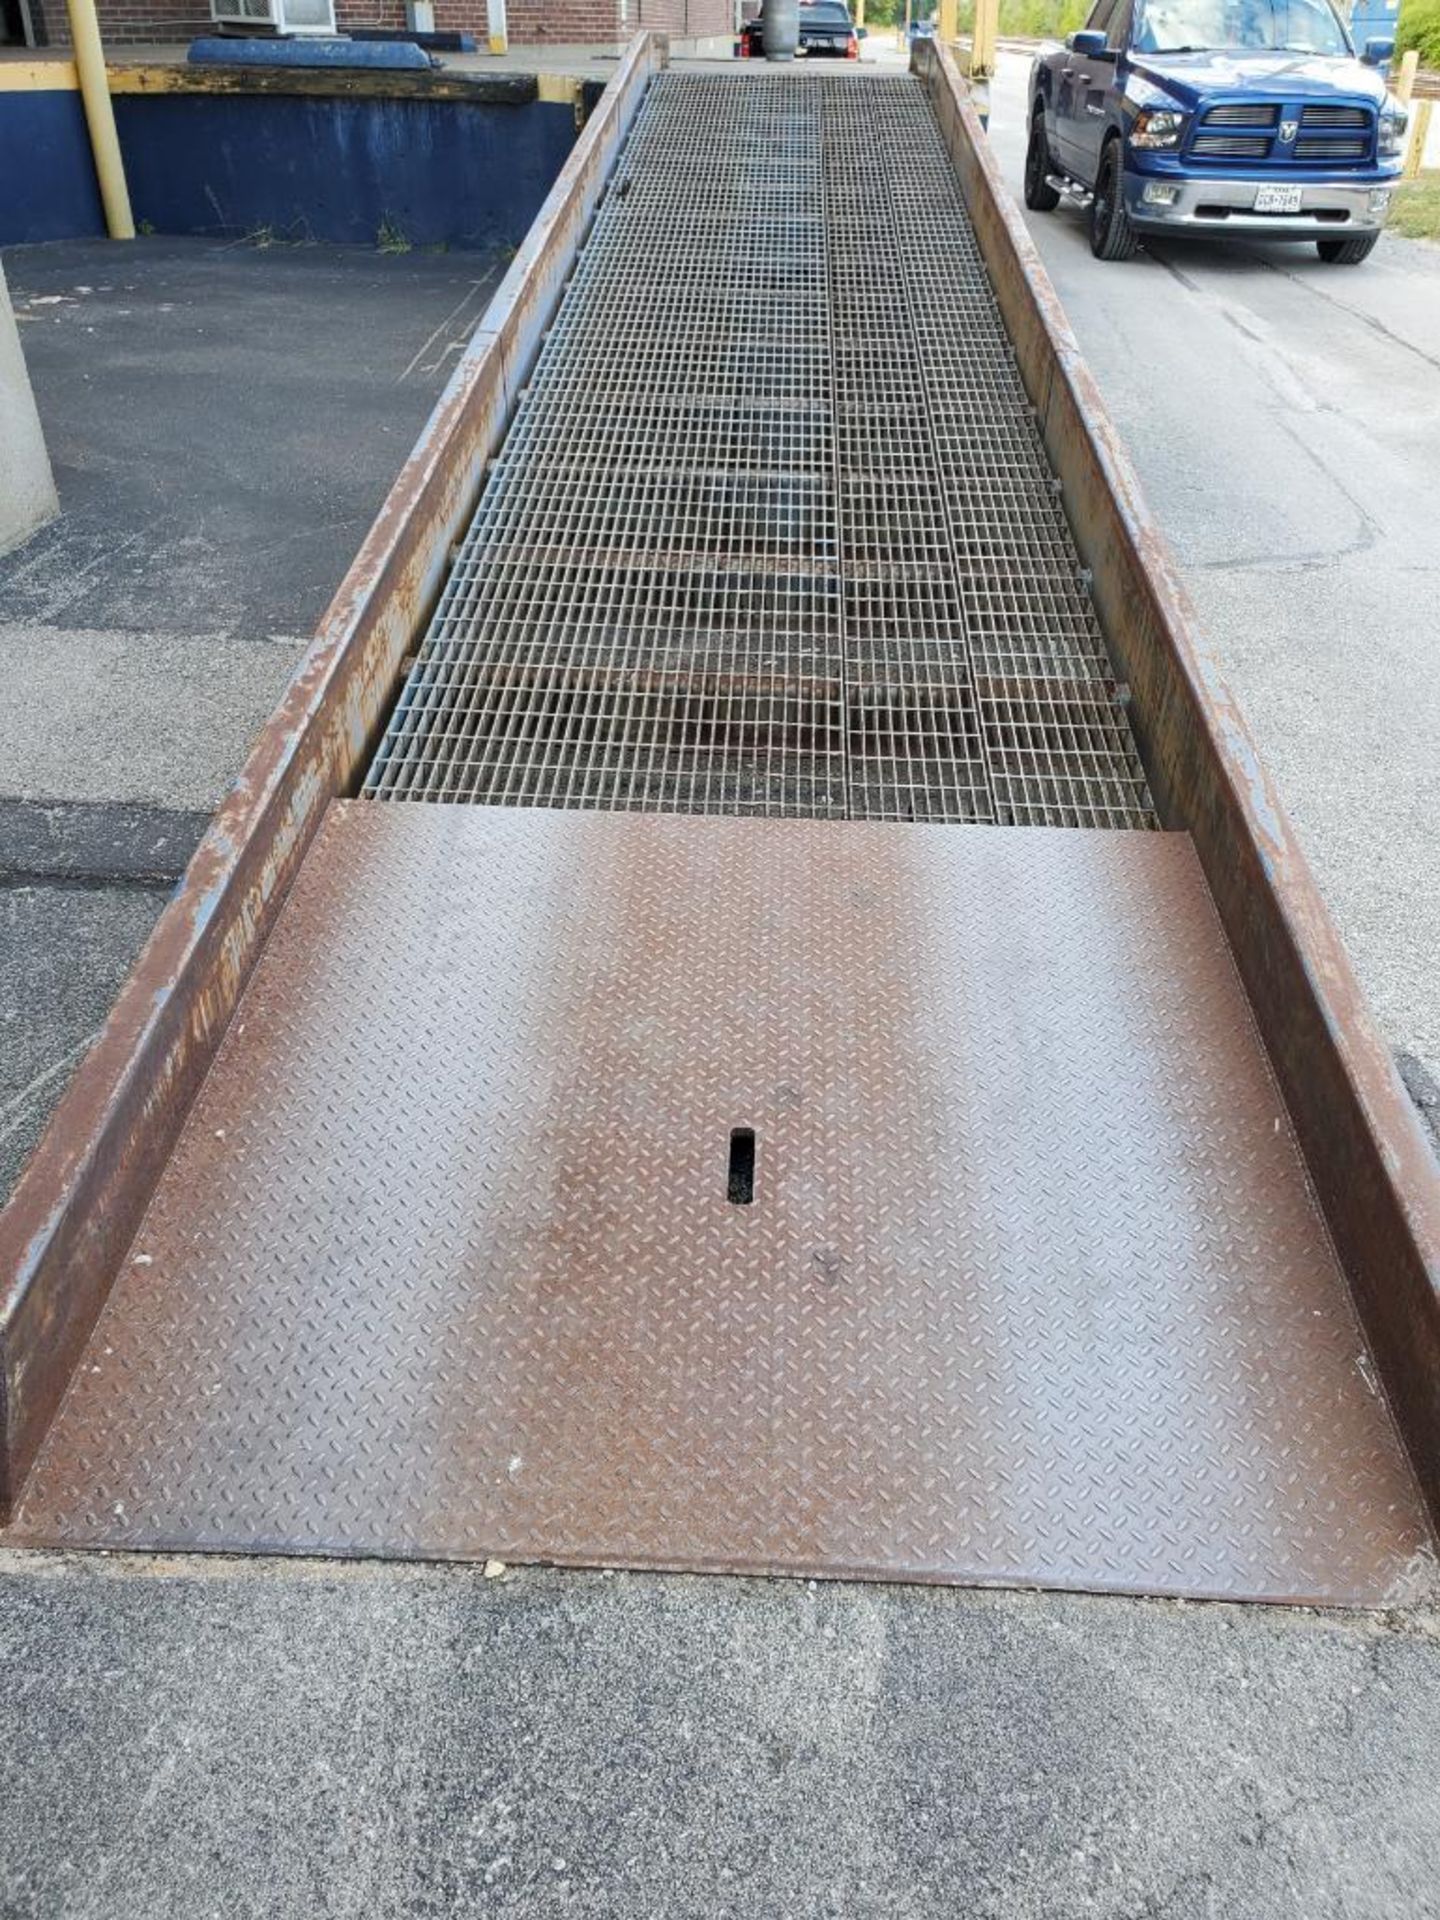 Dock Ramp, 27' X 64", Center Pneumatic Tire Axle, Level Off Top, Adjustable Pitch (Delayed Removal u - Image 6 of 10